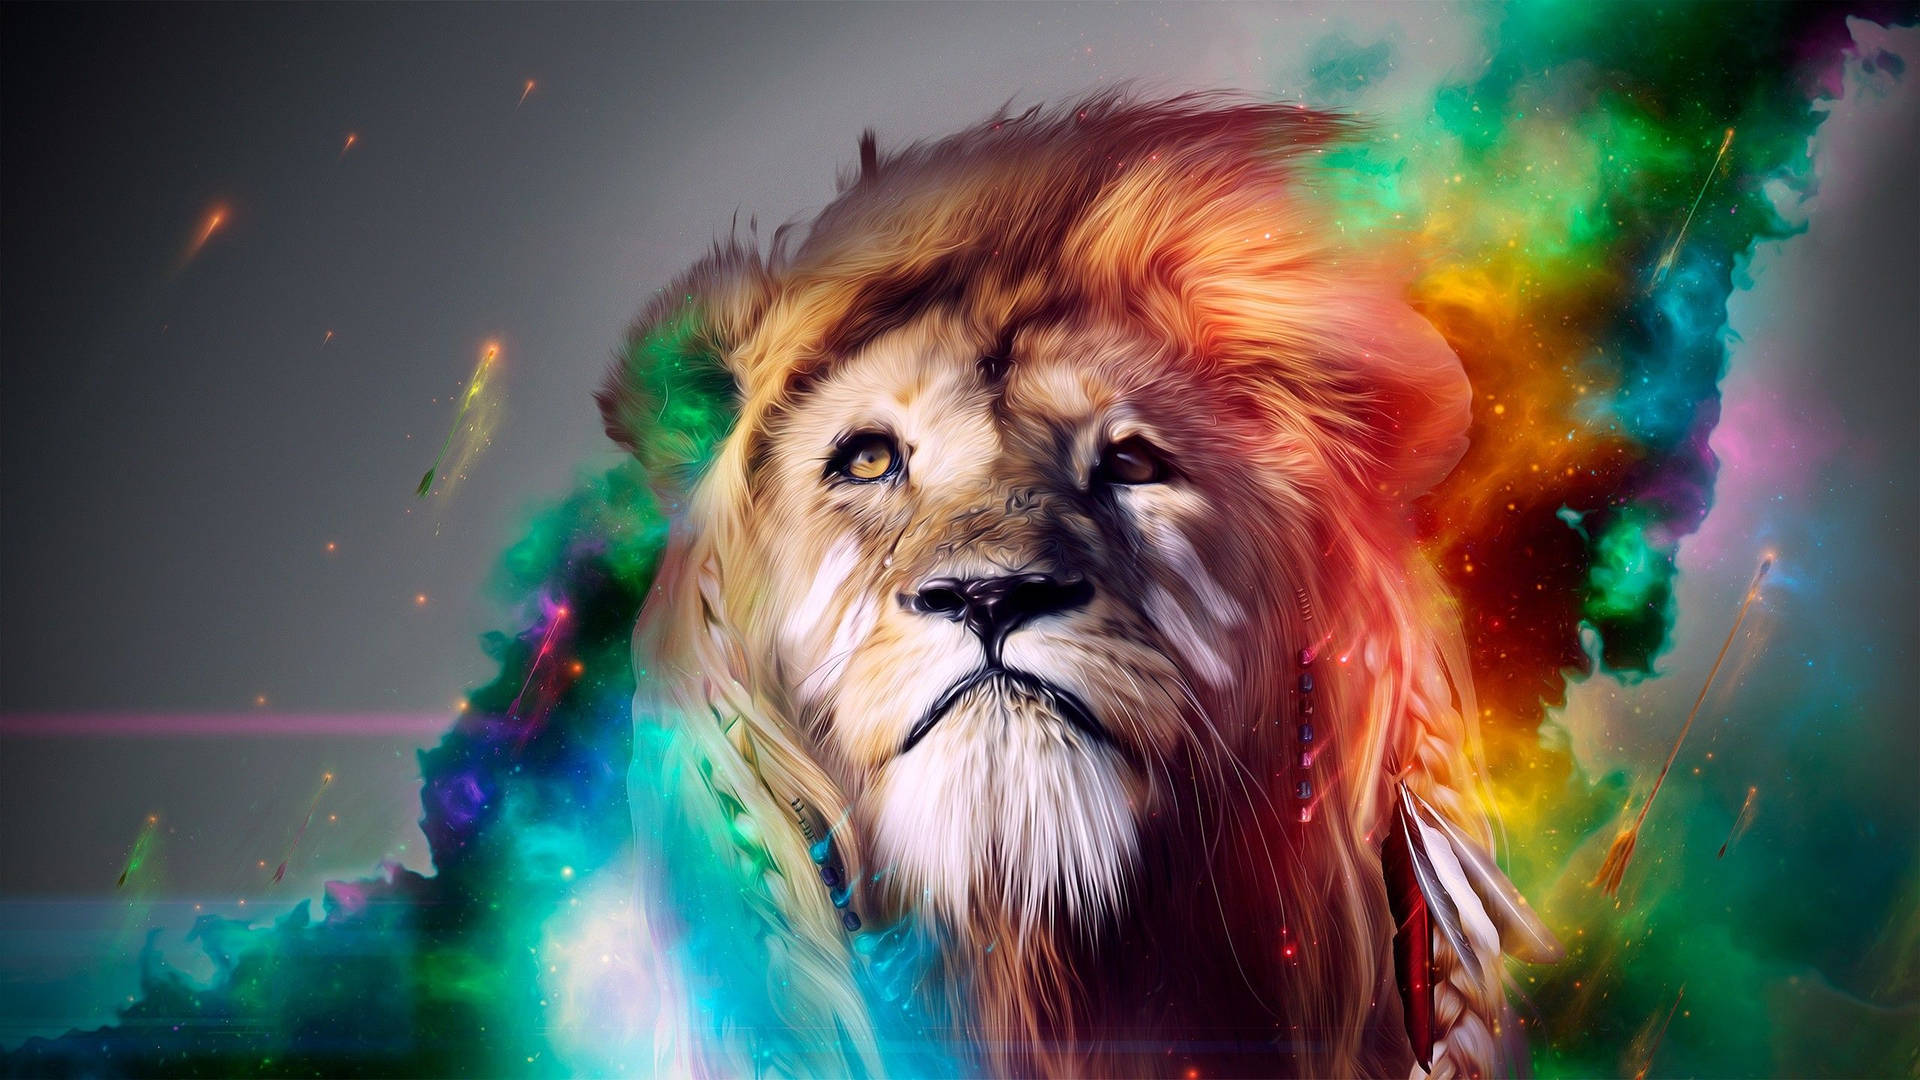 Lion With Colorful Smoke Background